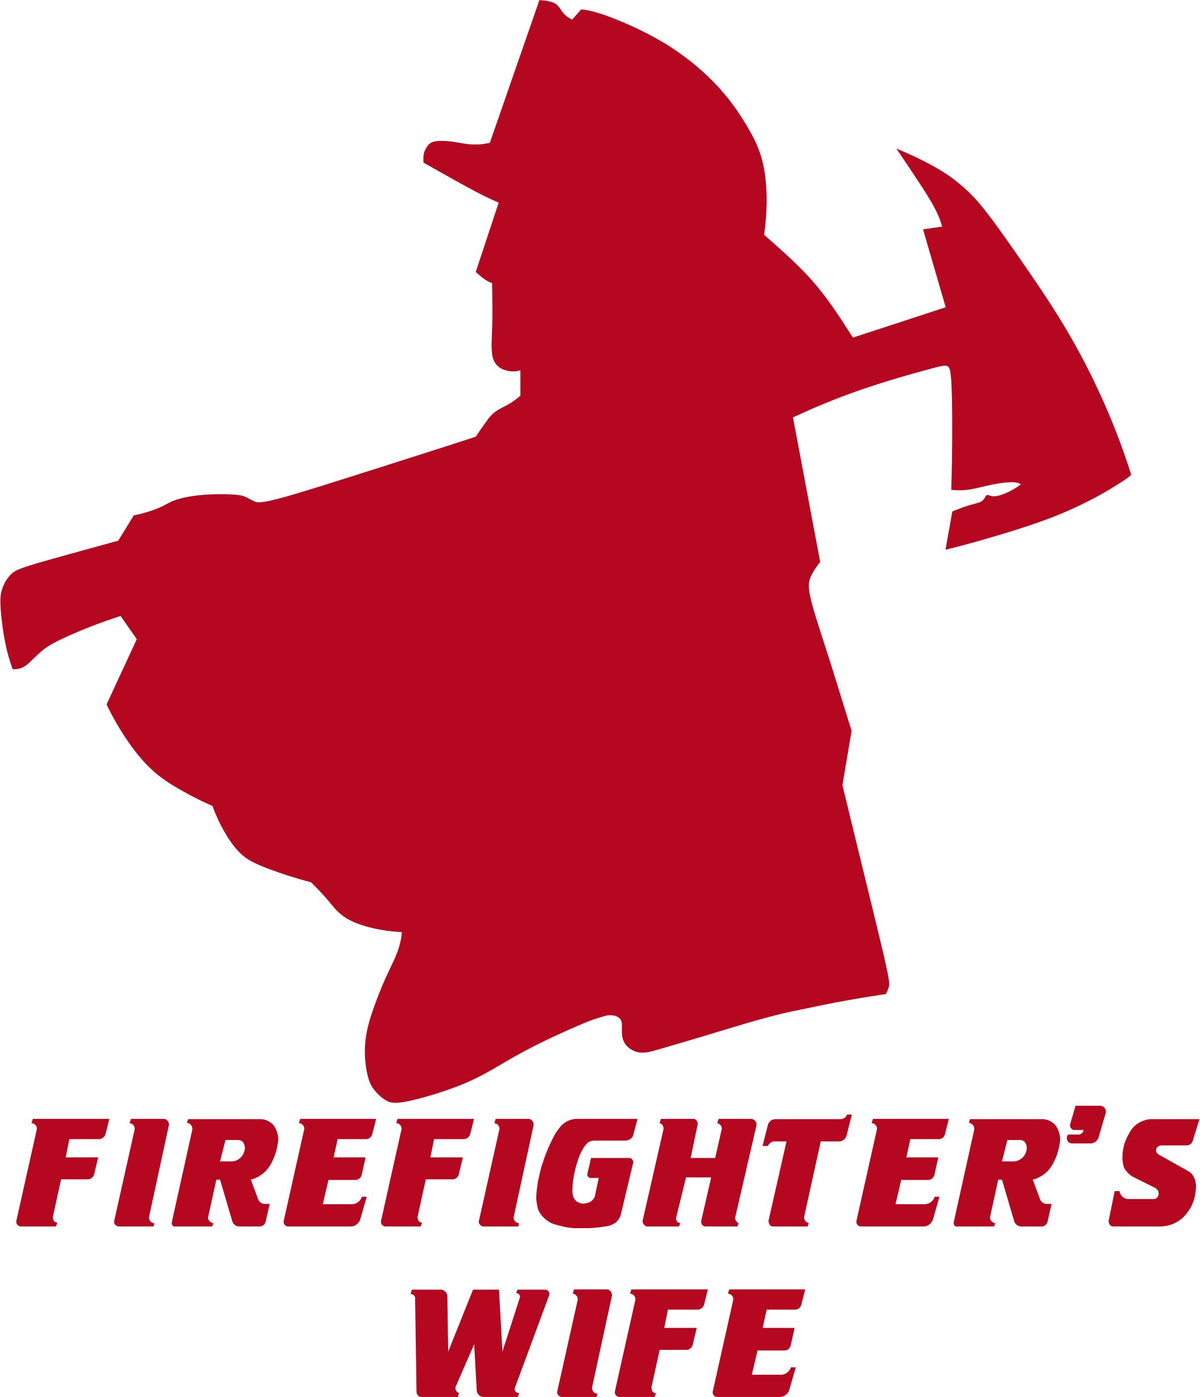 Firefighters Wife Silhouette Decal - Powercall Sirens LLC